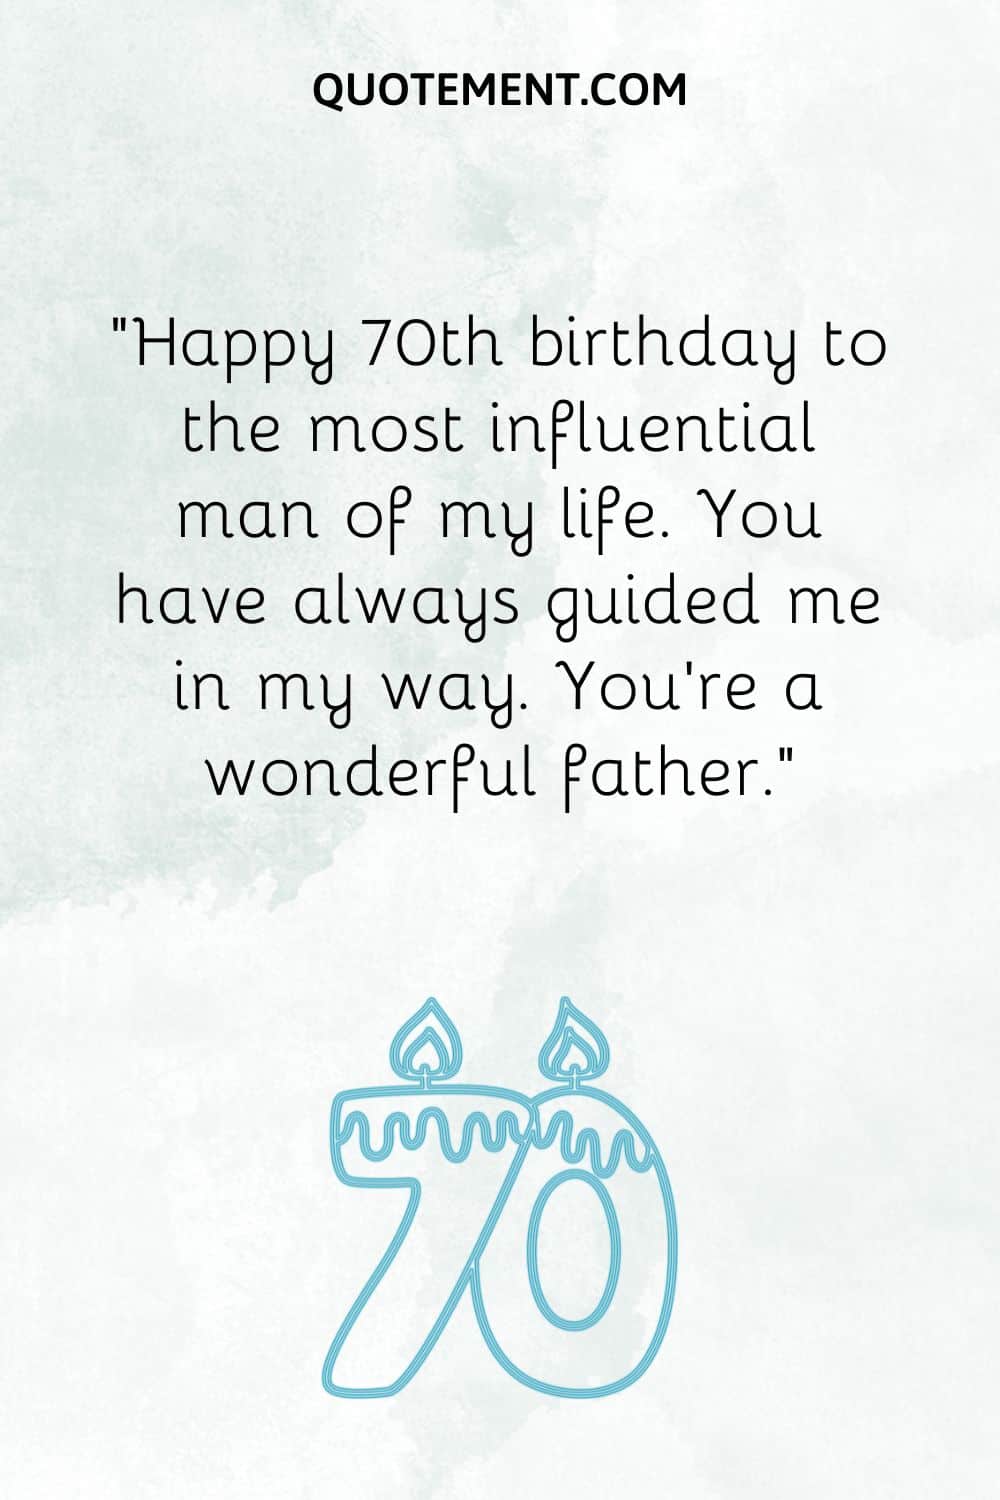 “Happy 70th birthday to the most influential man of my life. You have always guided me in my way. You’re a wonderful father.”